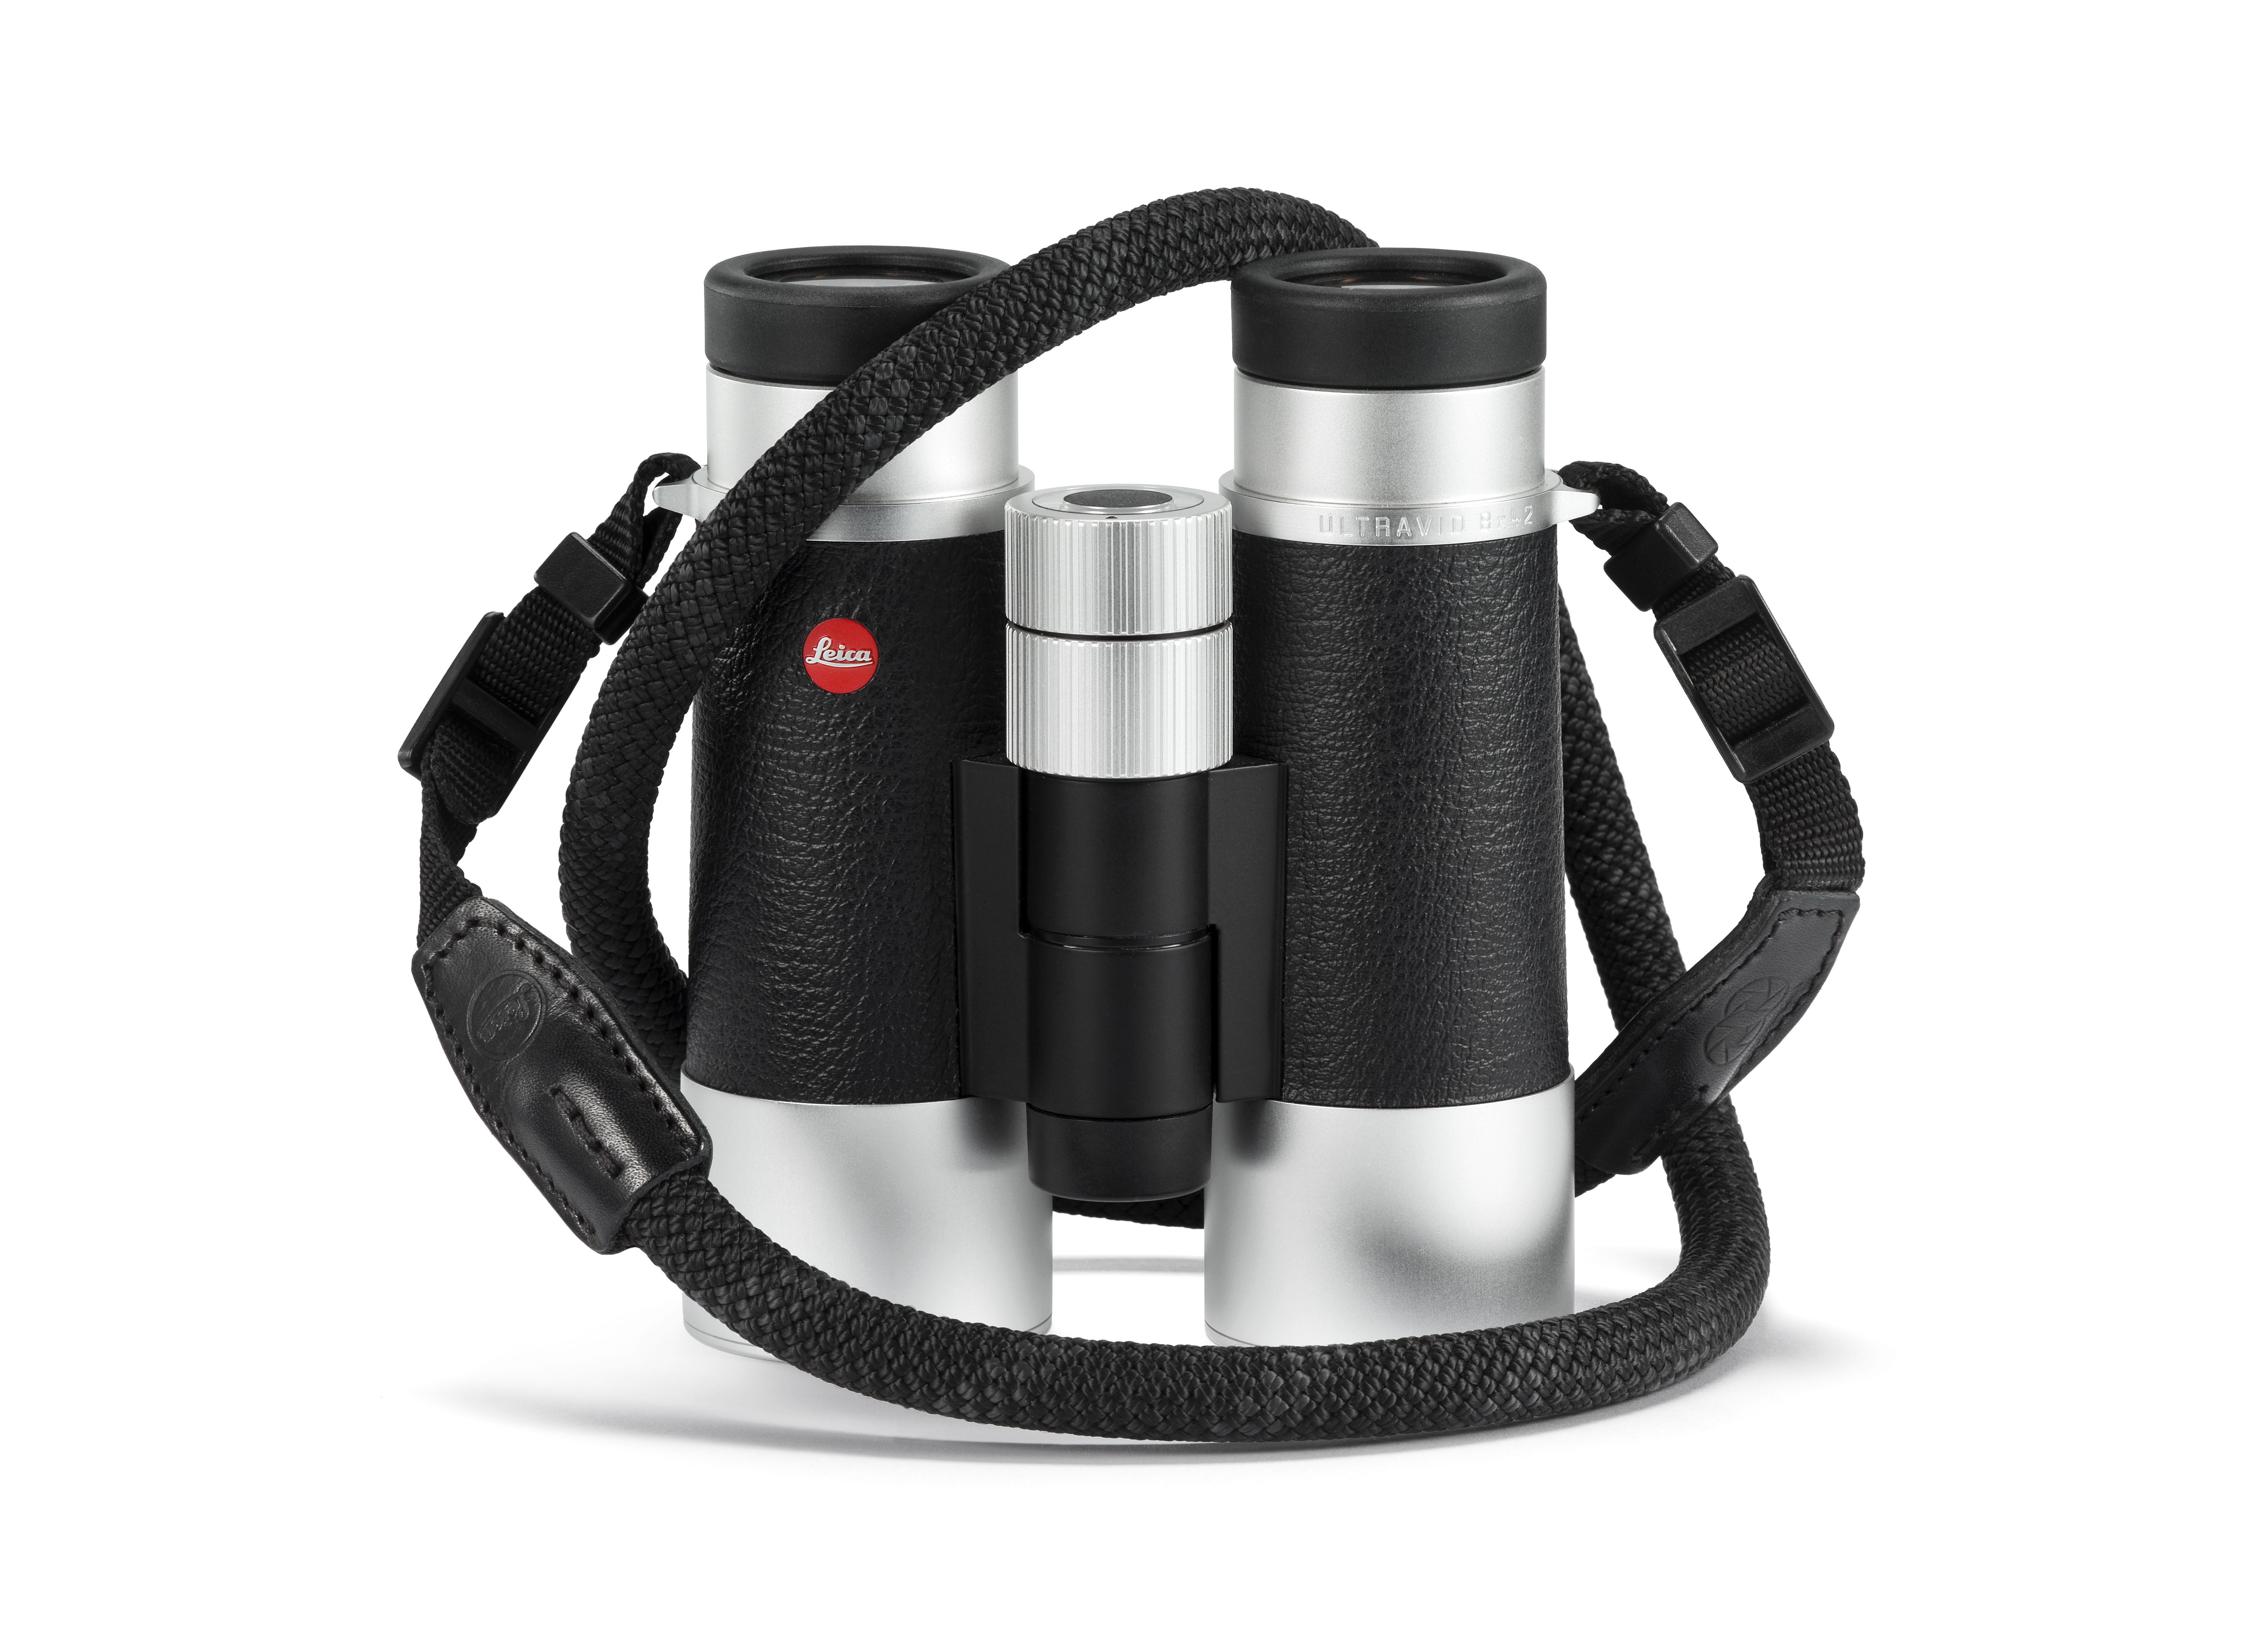 Leica Rope Strap